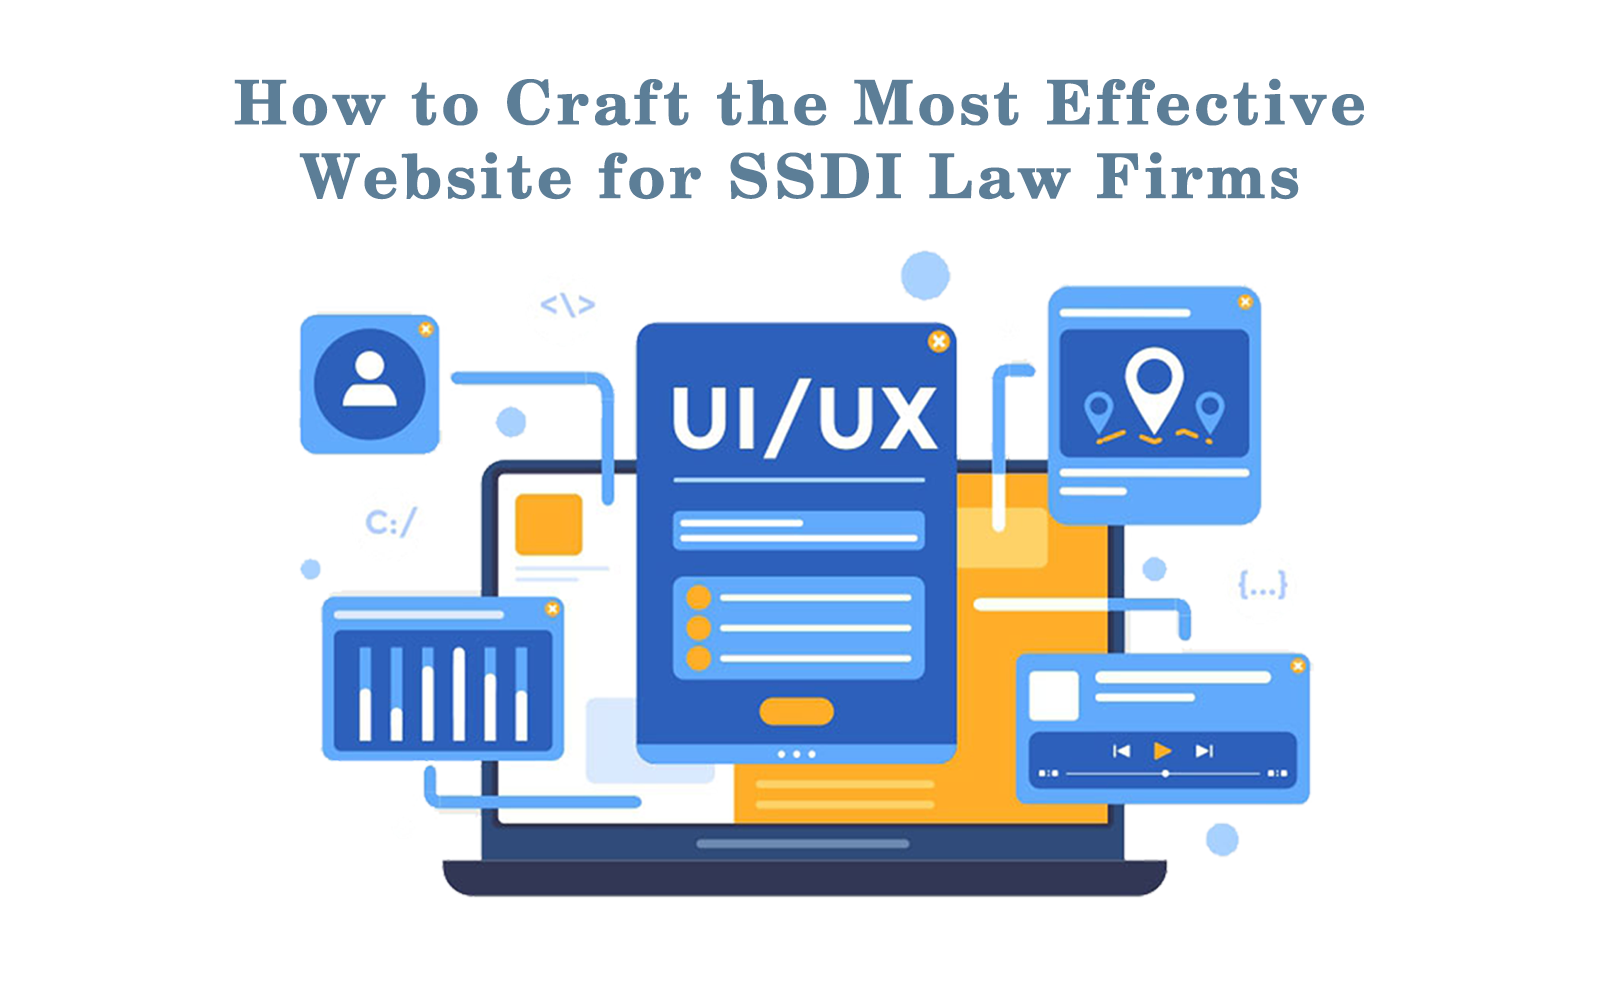 How to Craft the Most Effective Website for SSDI Law Firms